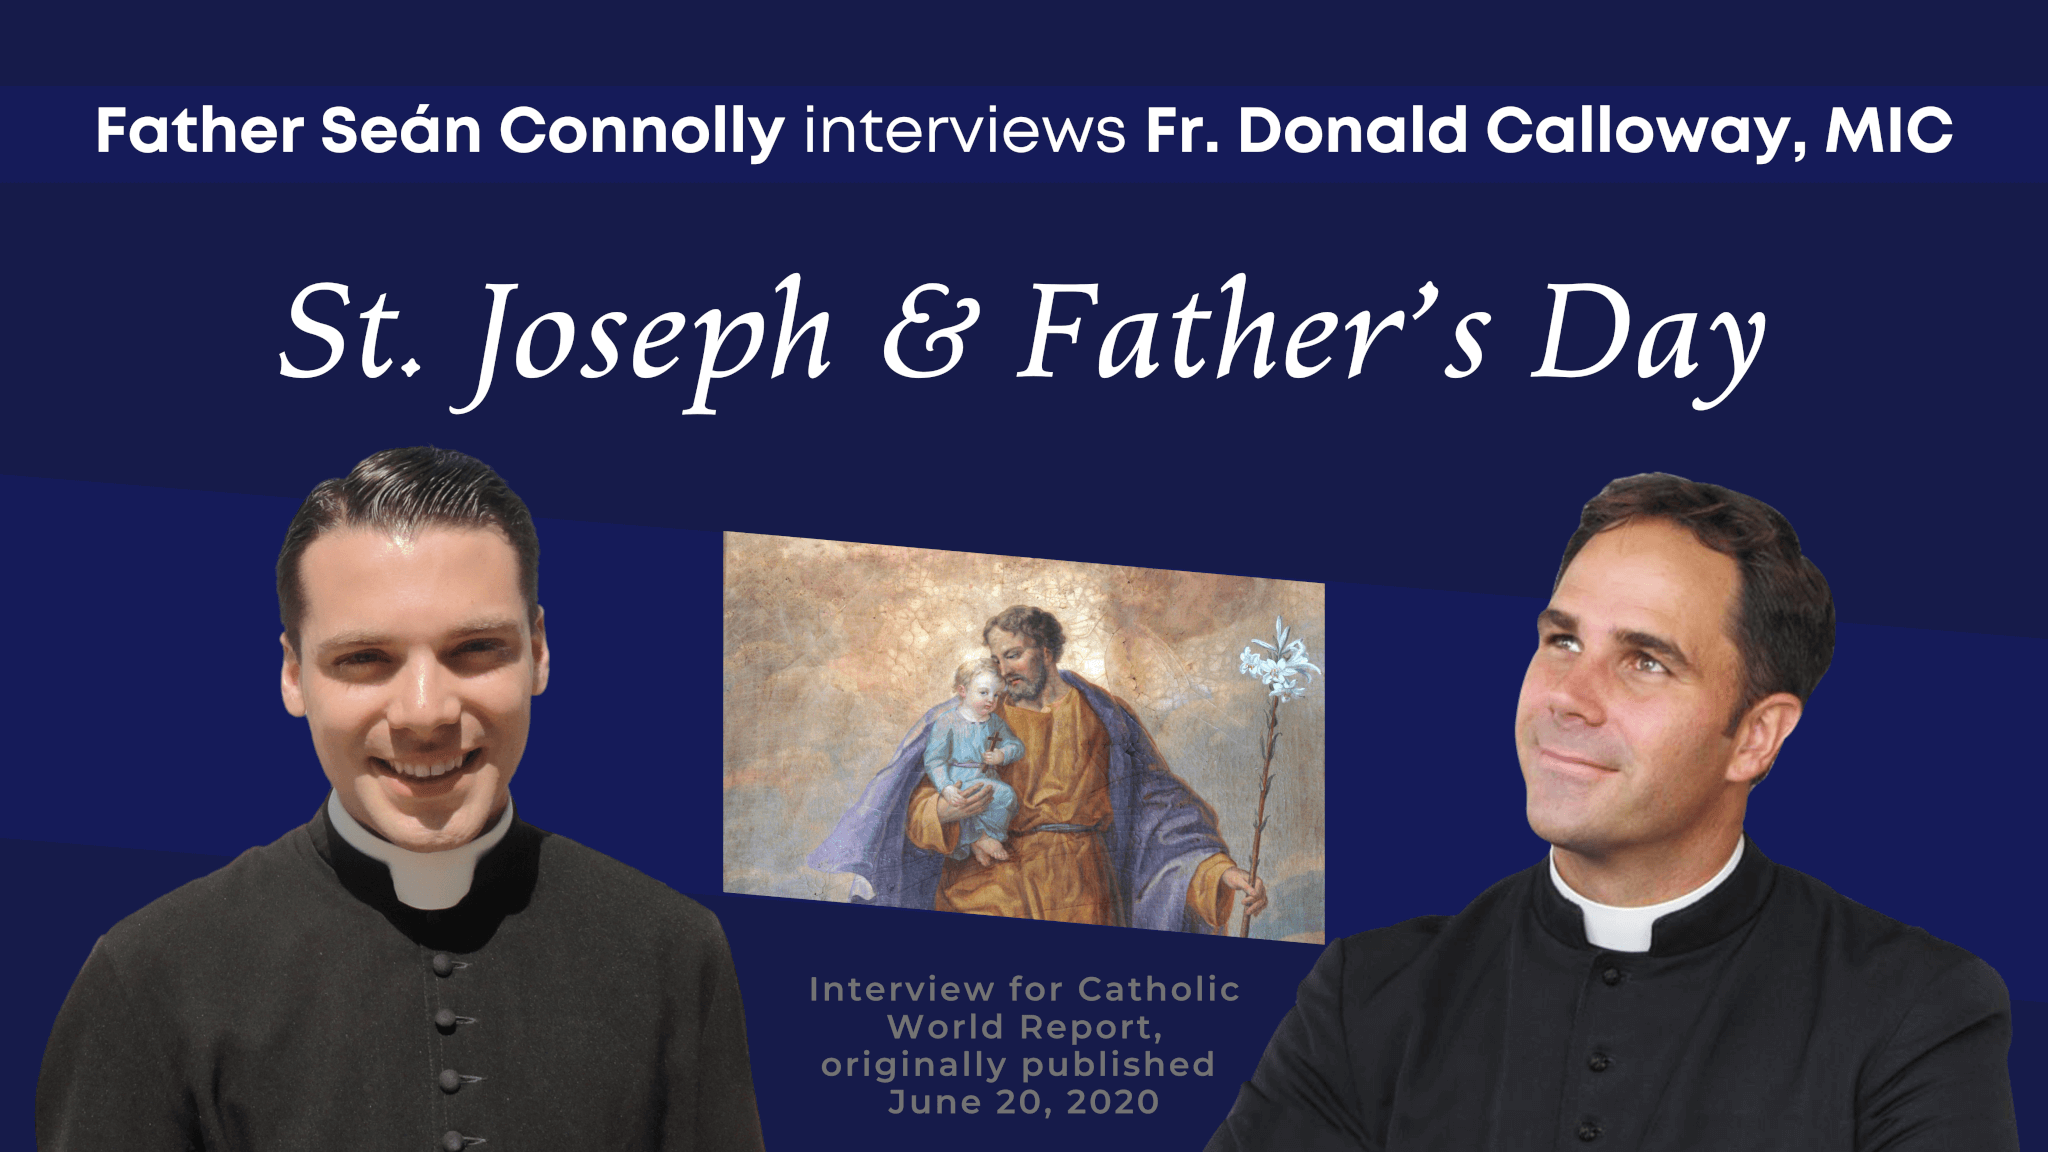 fathers-day-connolly-calloway-206tours